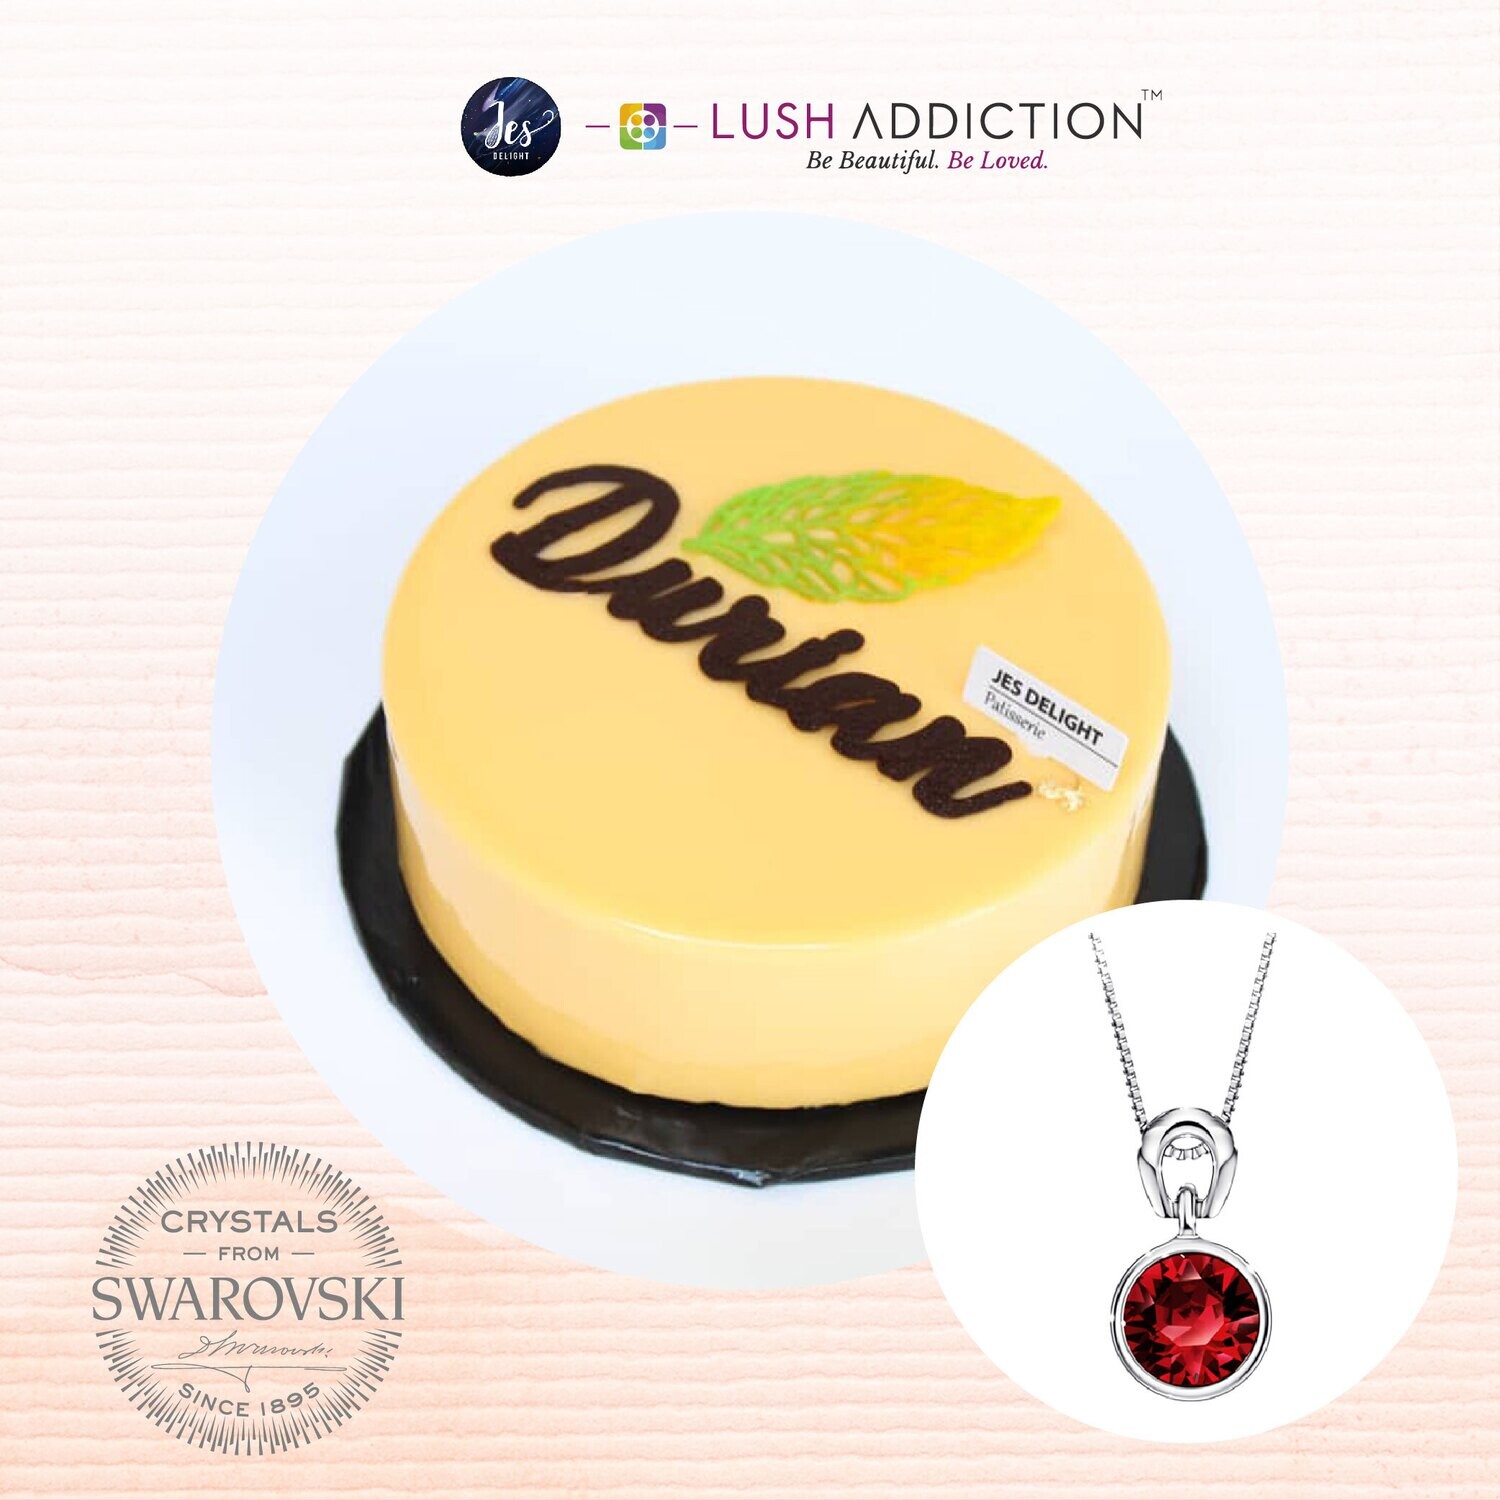 Durian Cake + Lush Solitaire Birthstone Necklace Bundle Deal (By: JES Delight from JB)